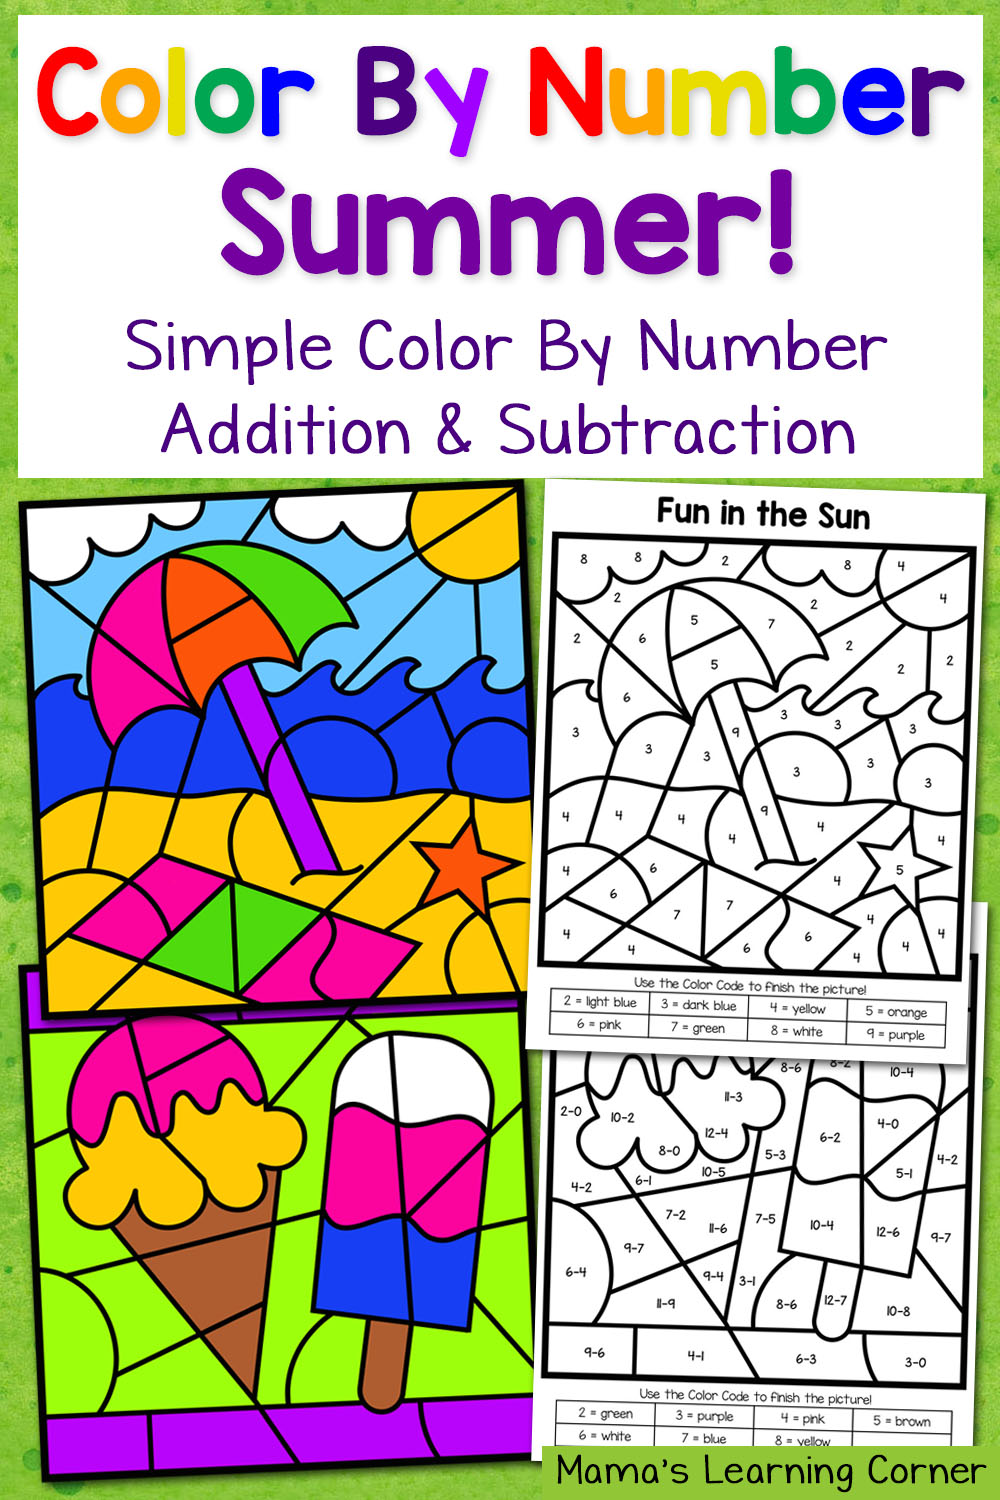 Summer Color By Number Worksheets with Simple Numbers Plus Addition and